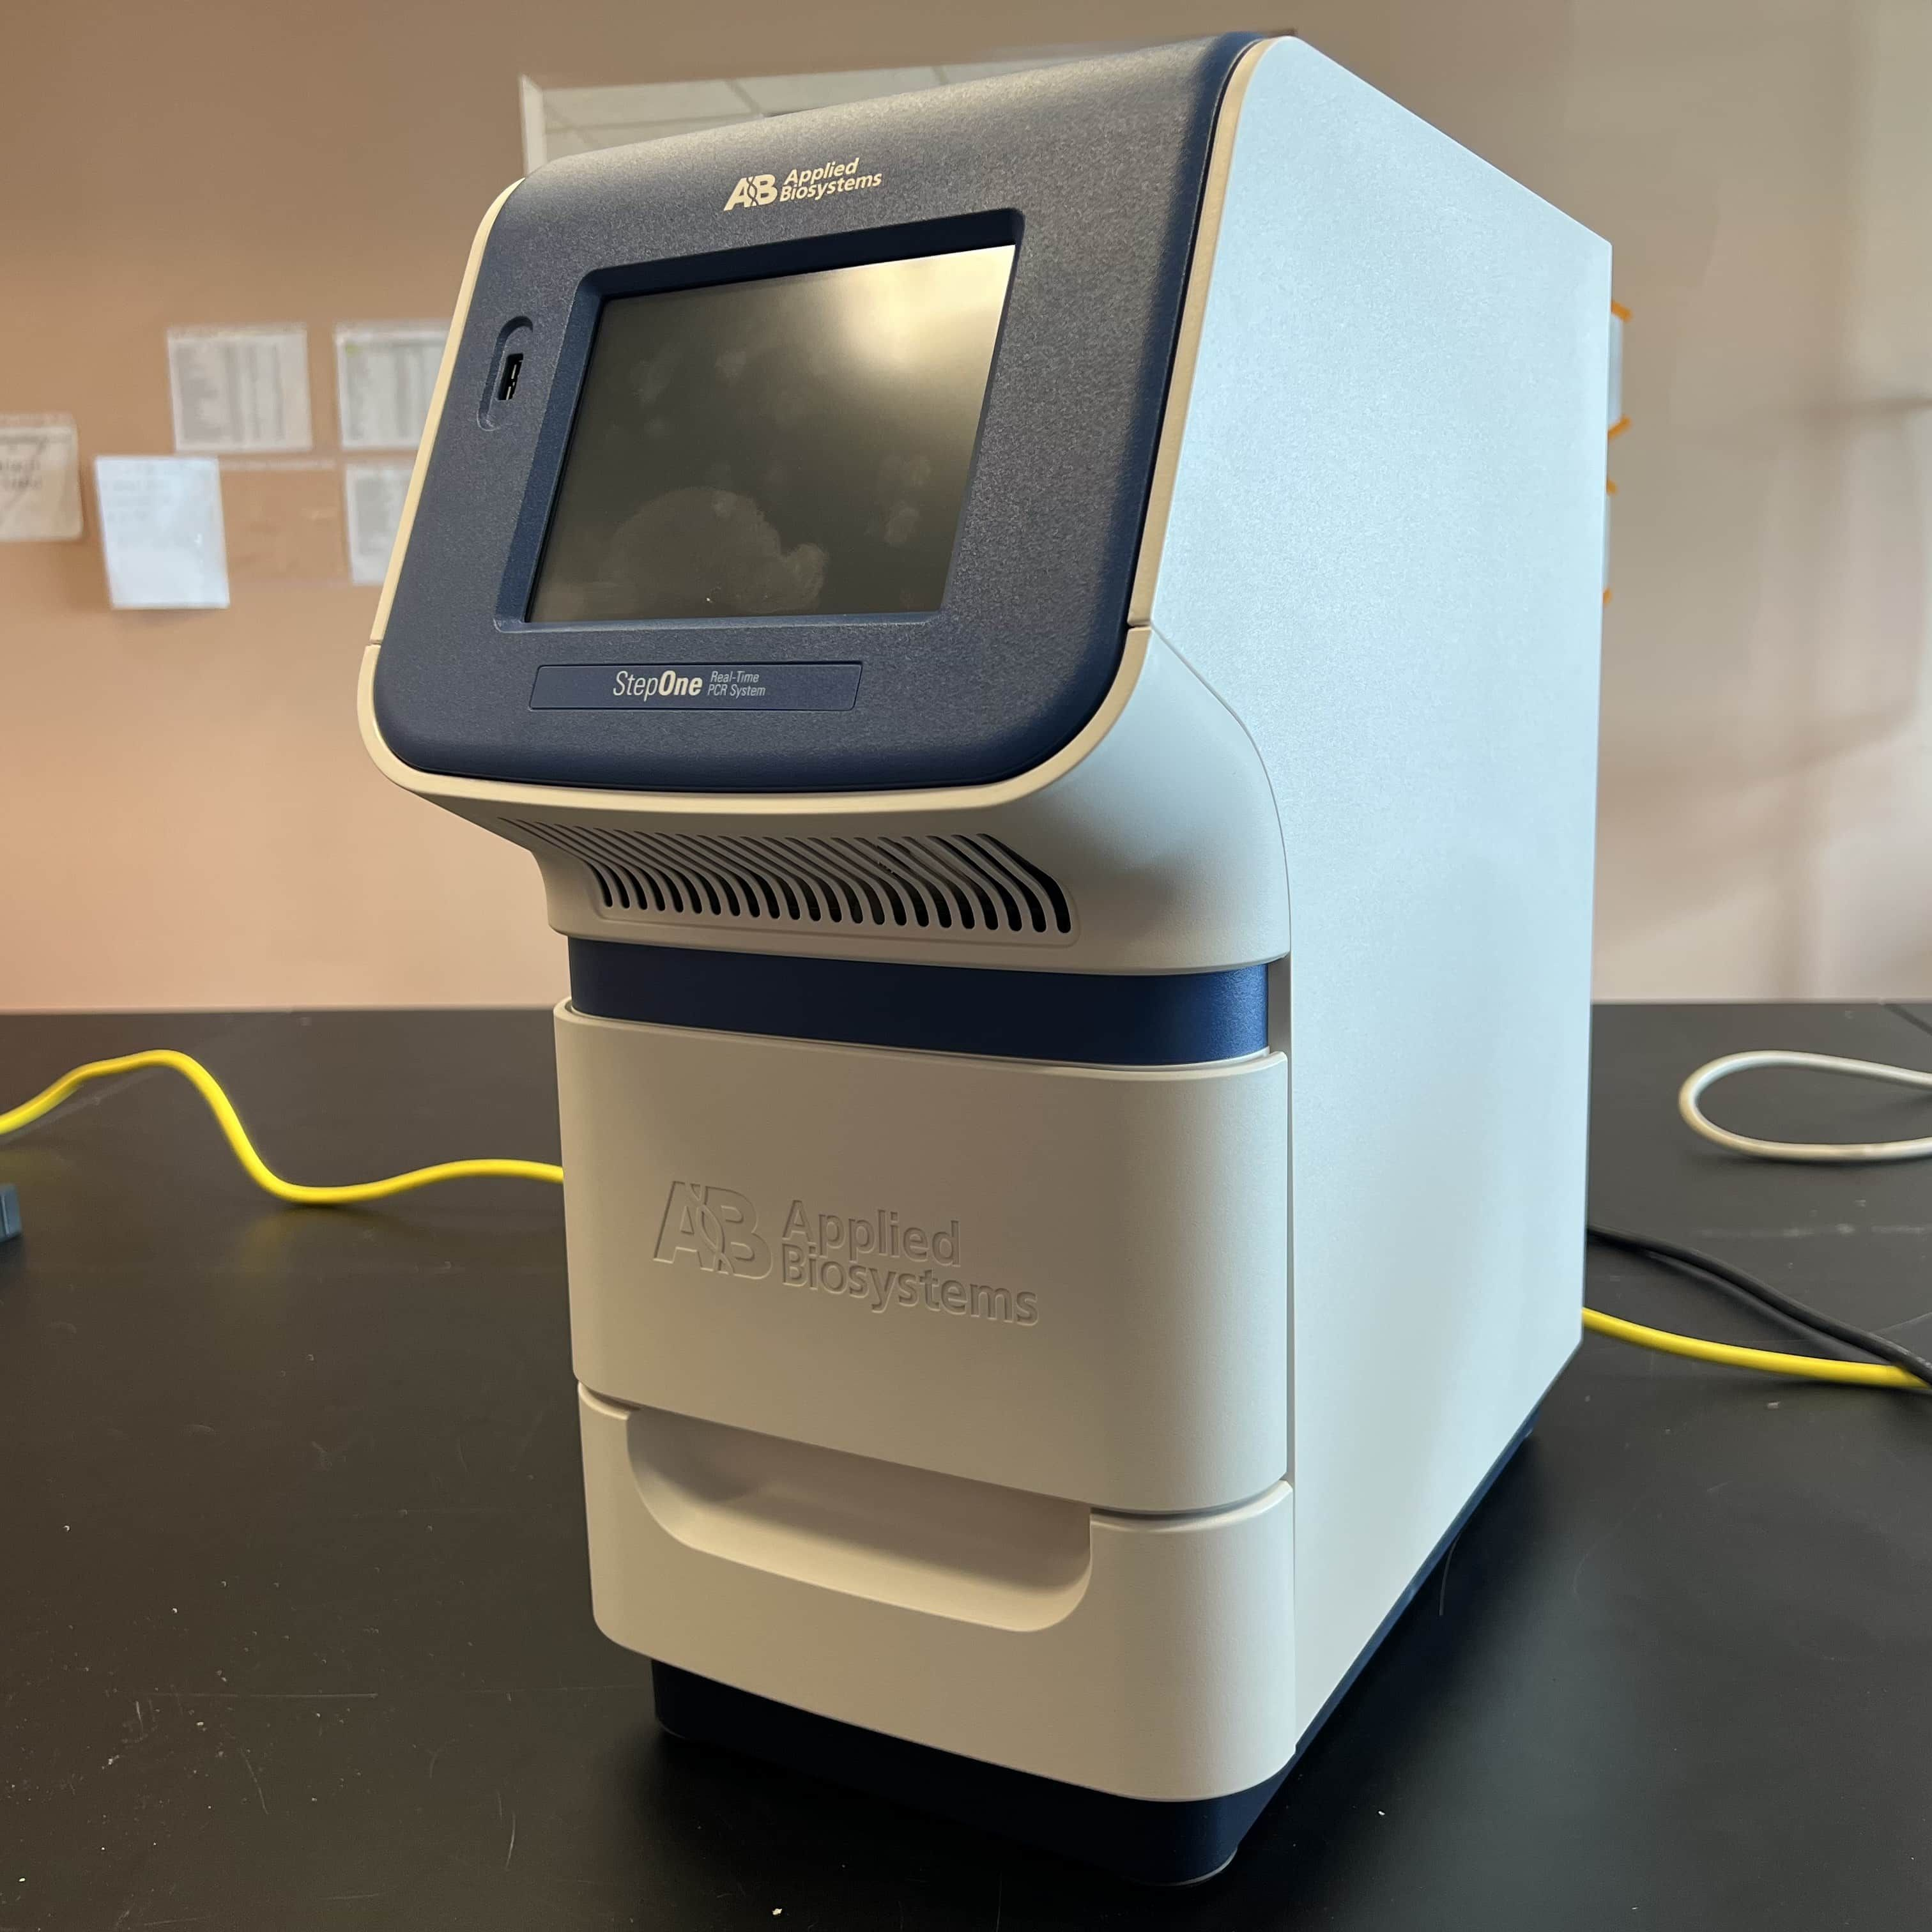 Applied biosystems stepone real time pcr system